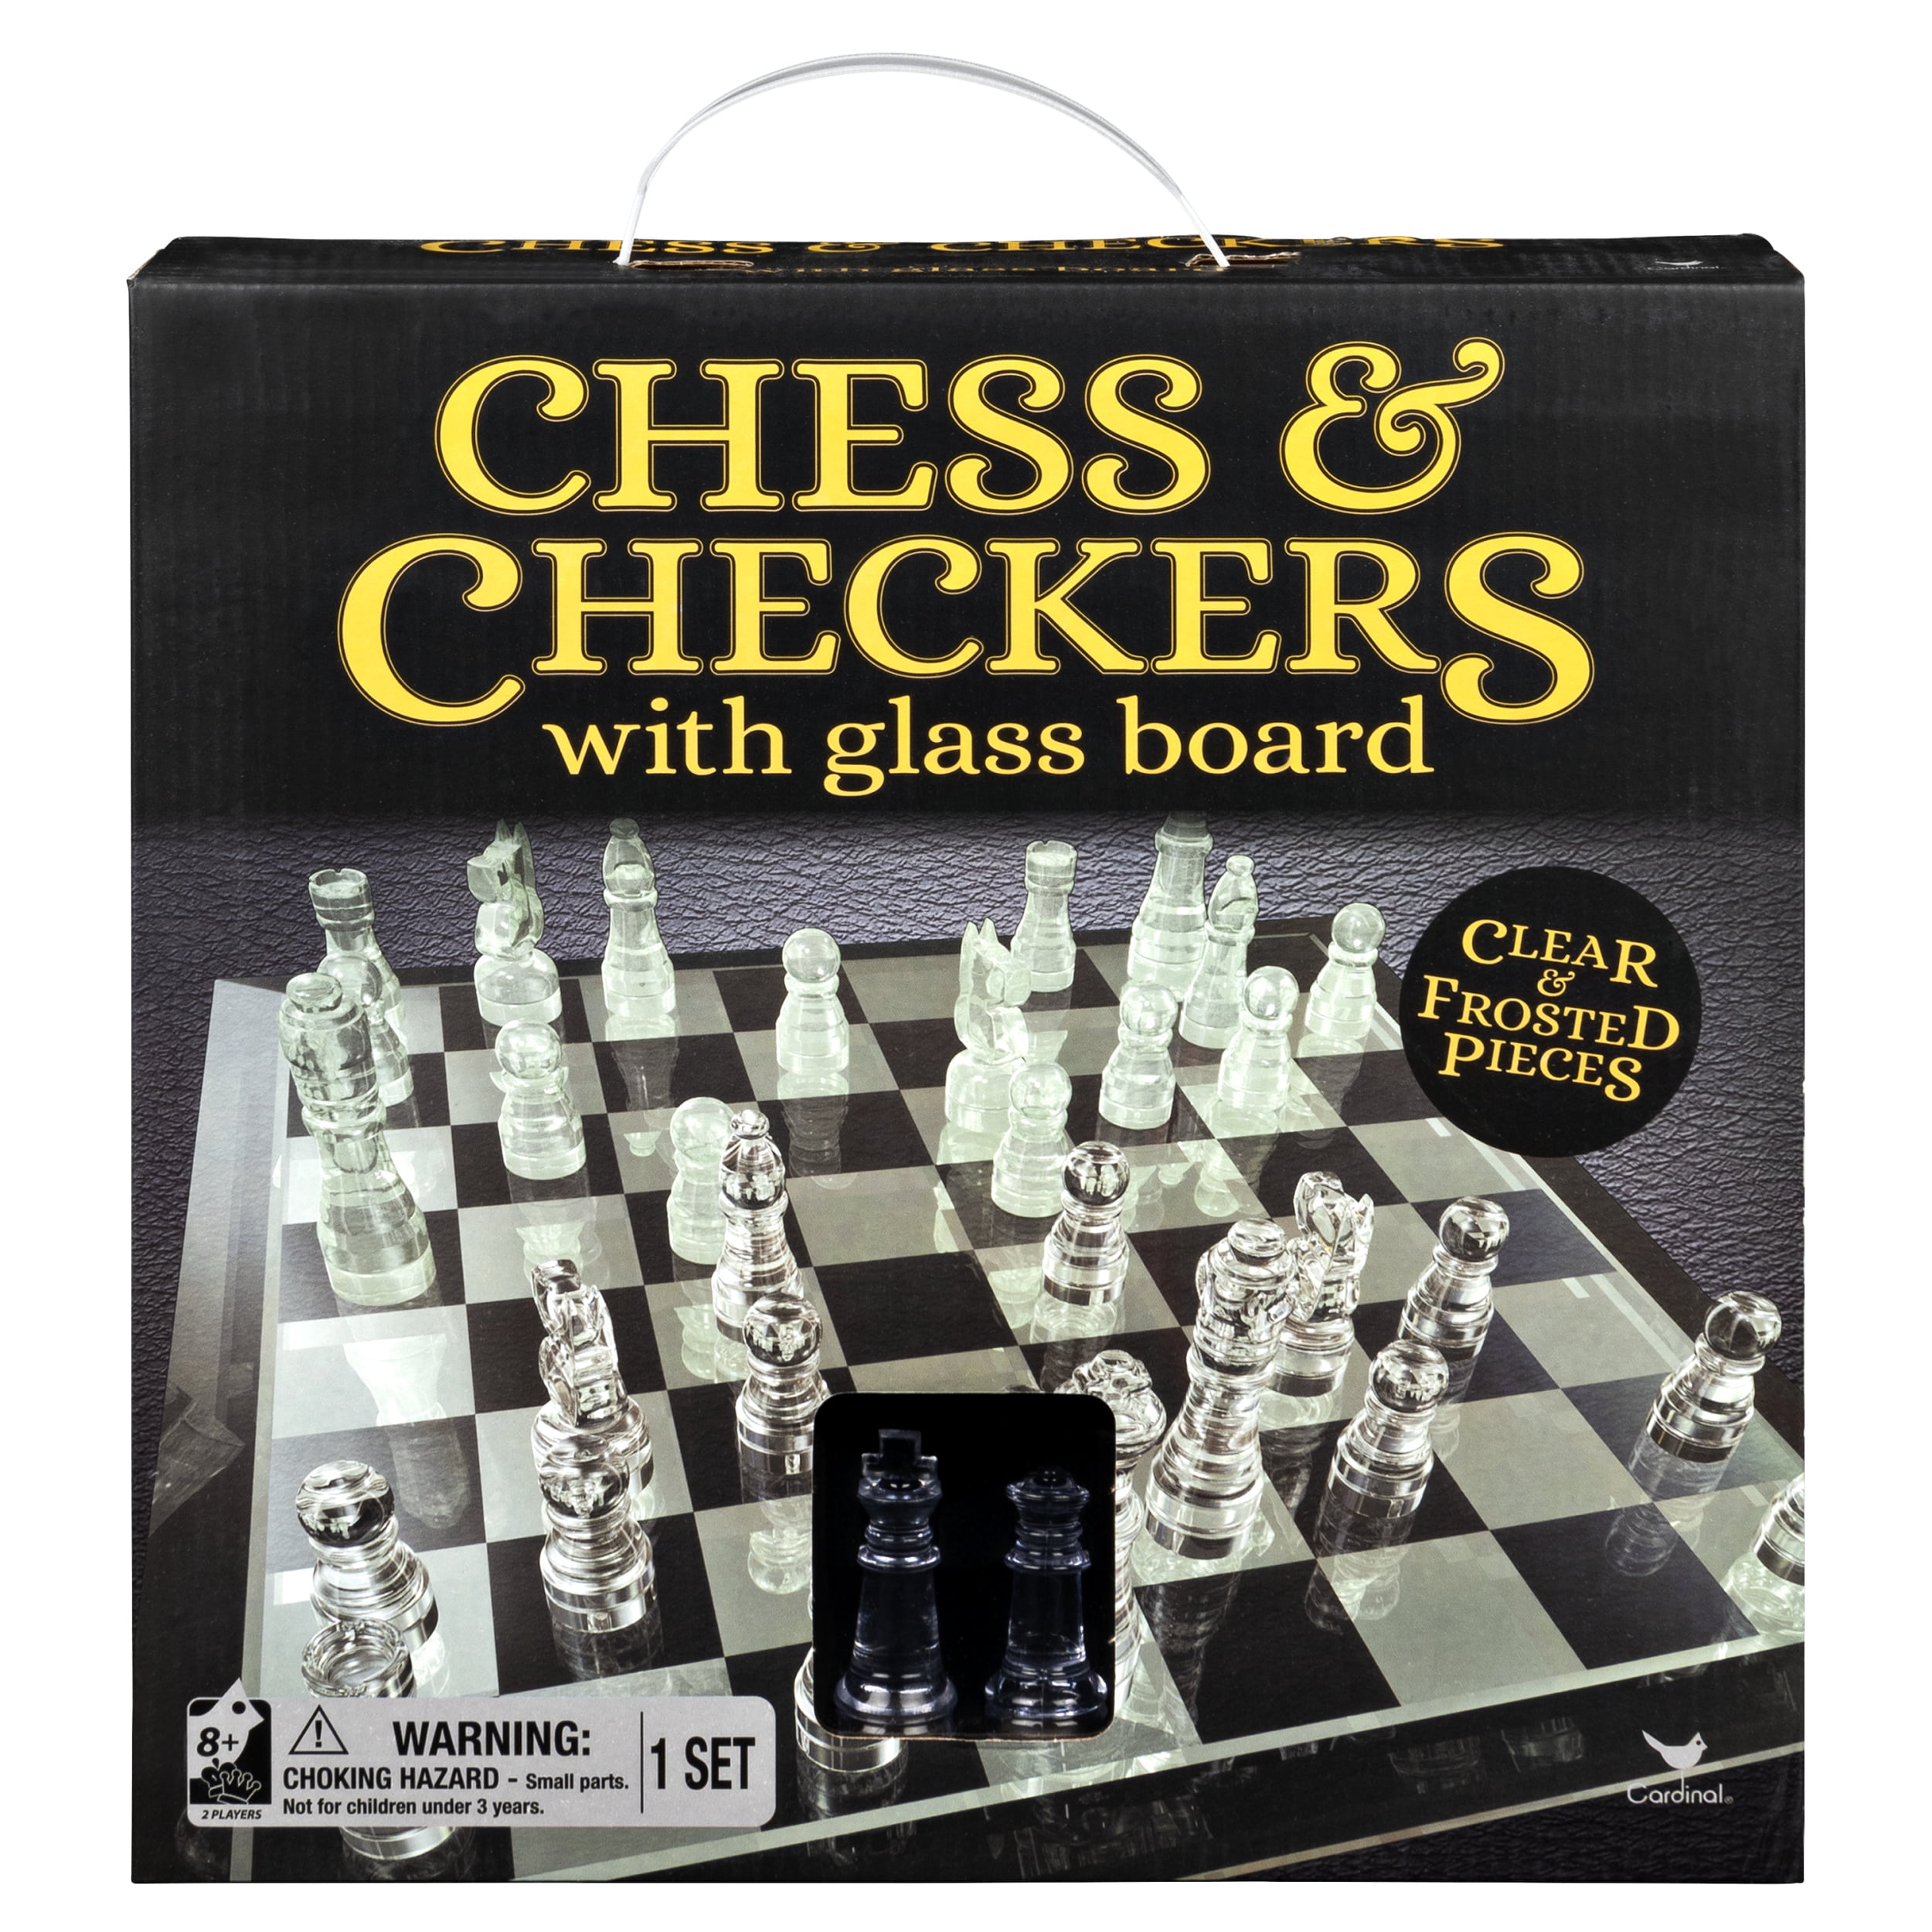 when was checkers invented